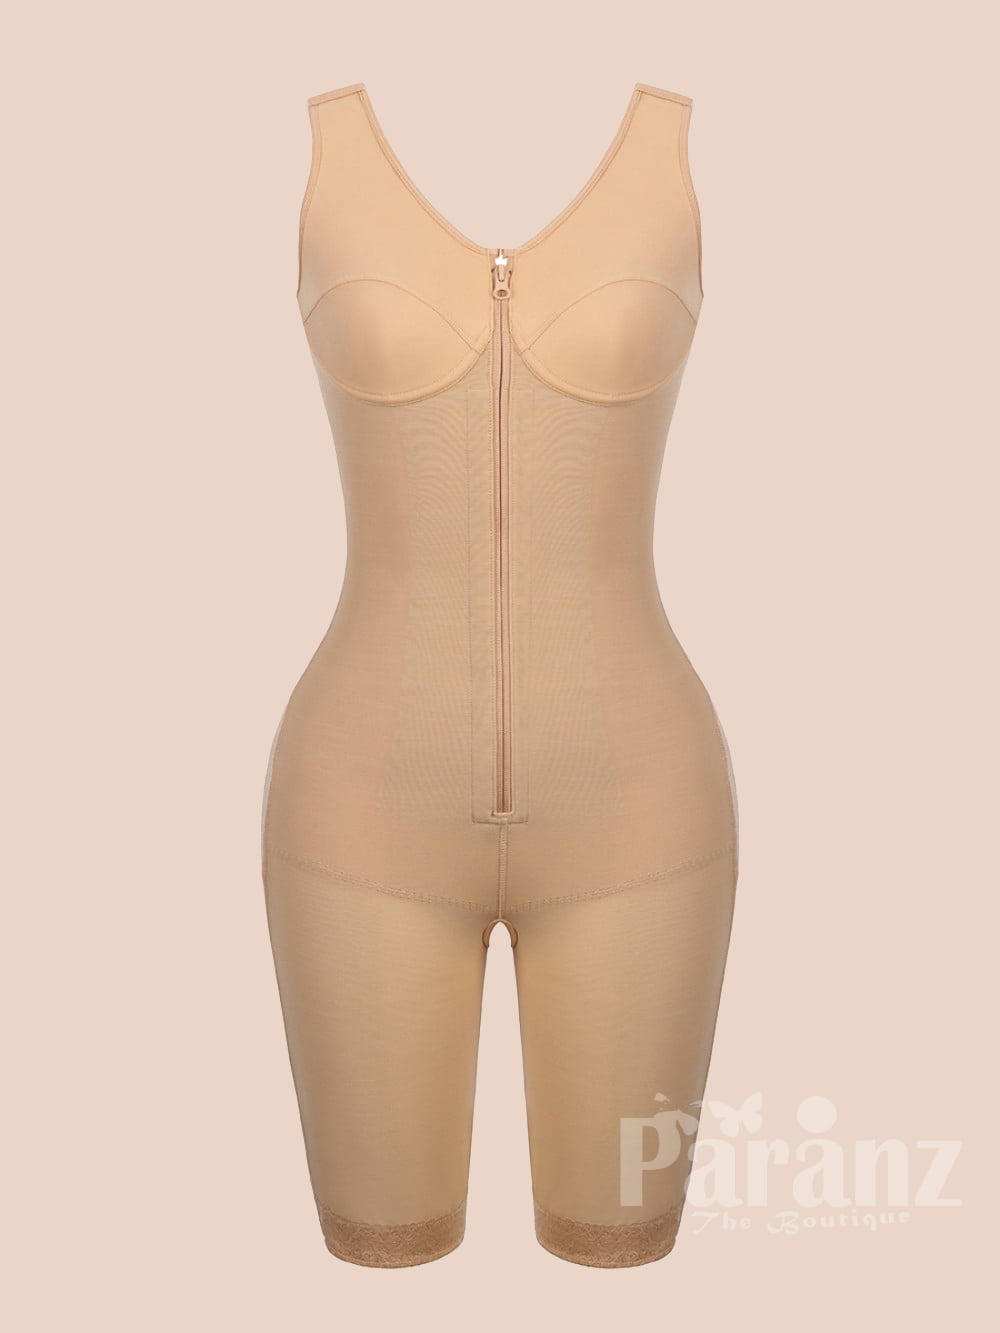 Wholesale Body Shaper With Open Crotch Cotton, Lace, Seamless